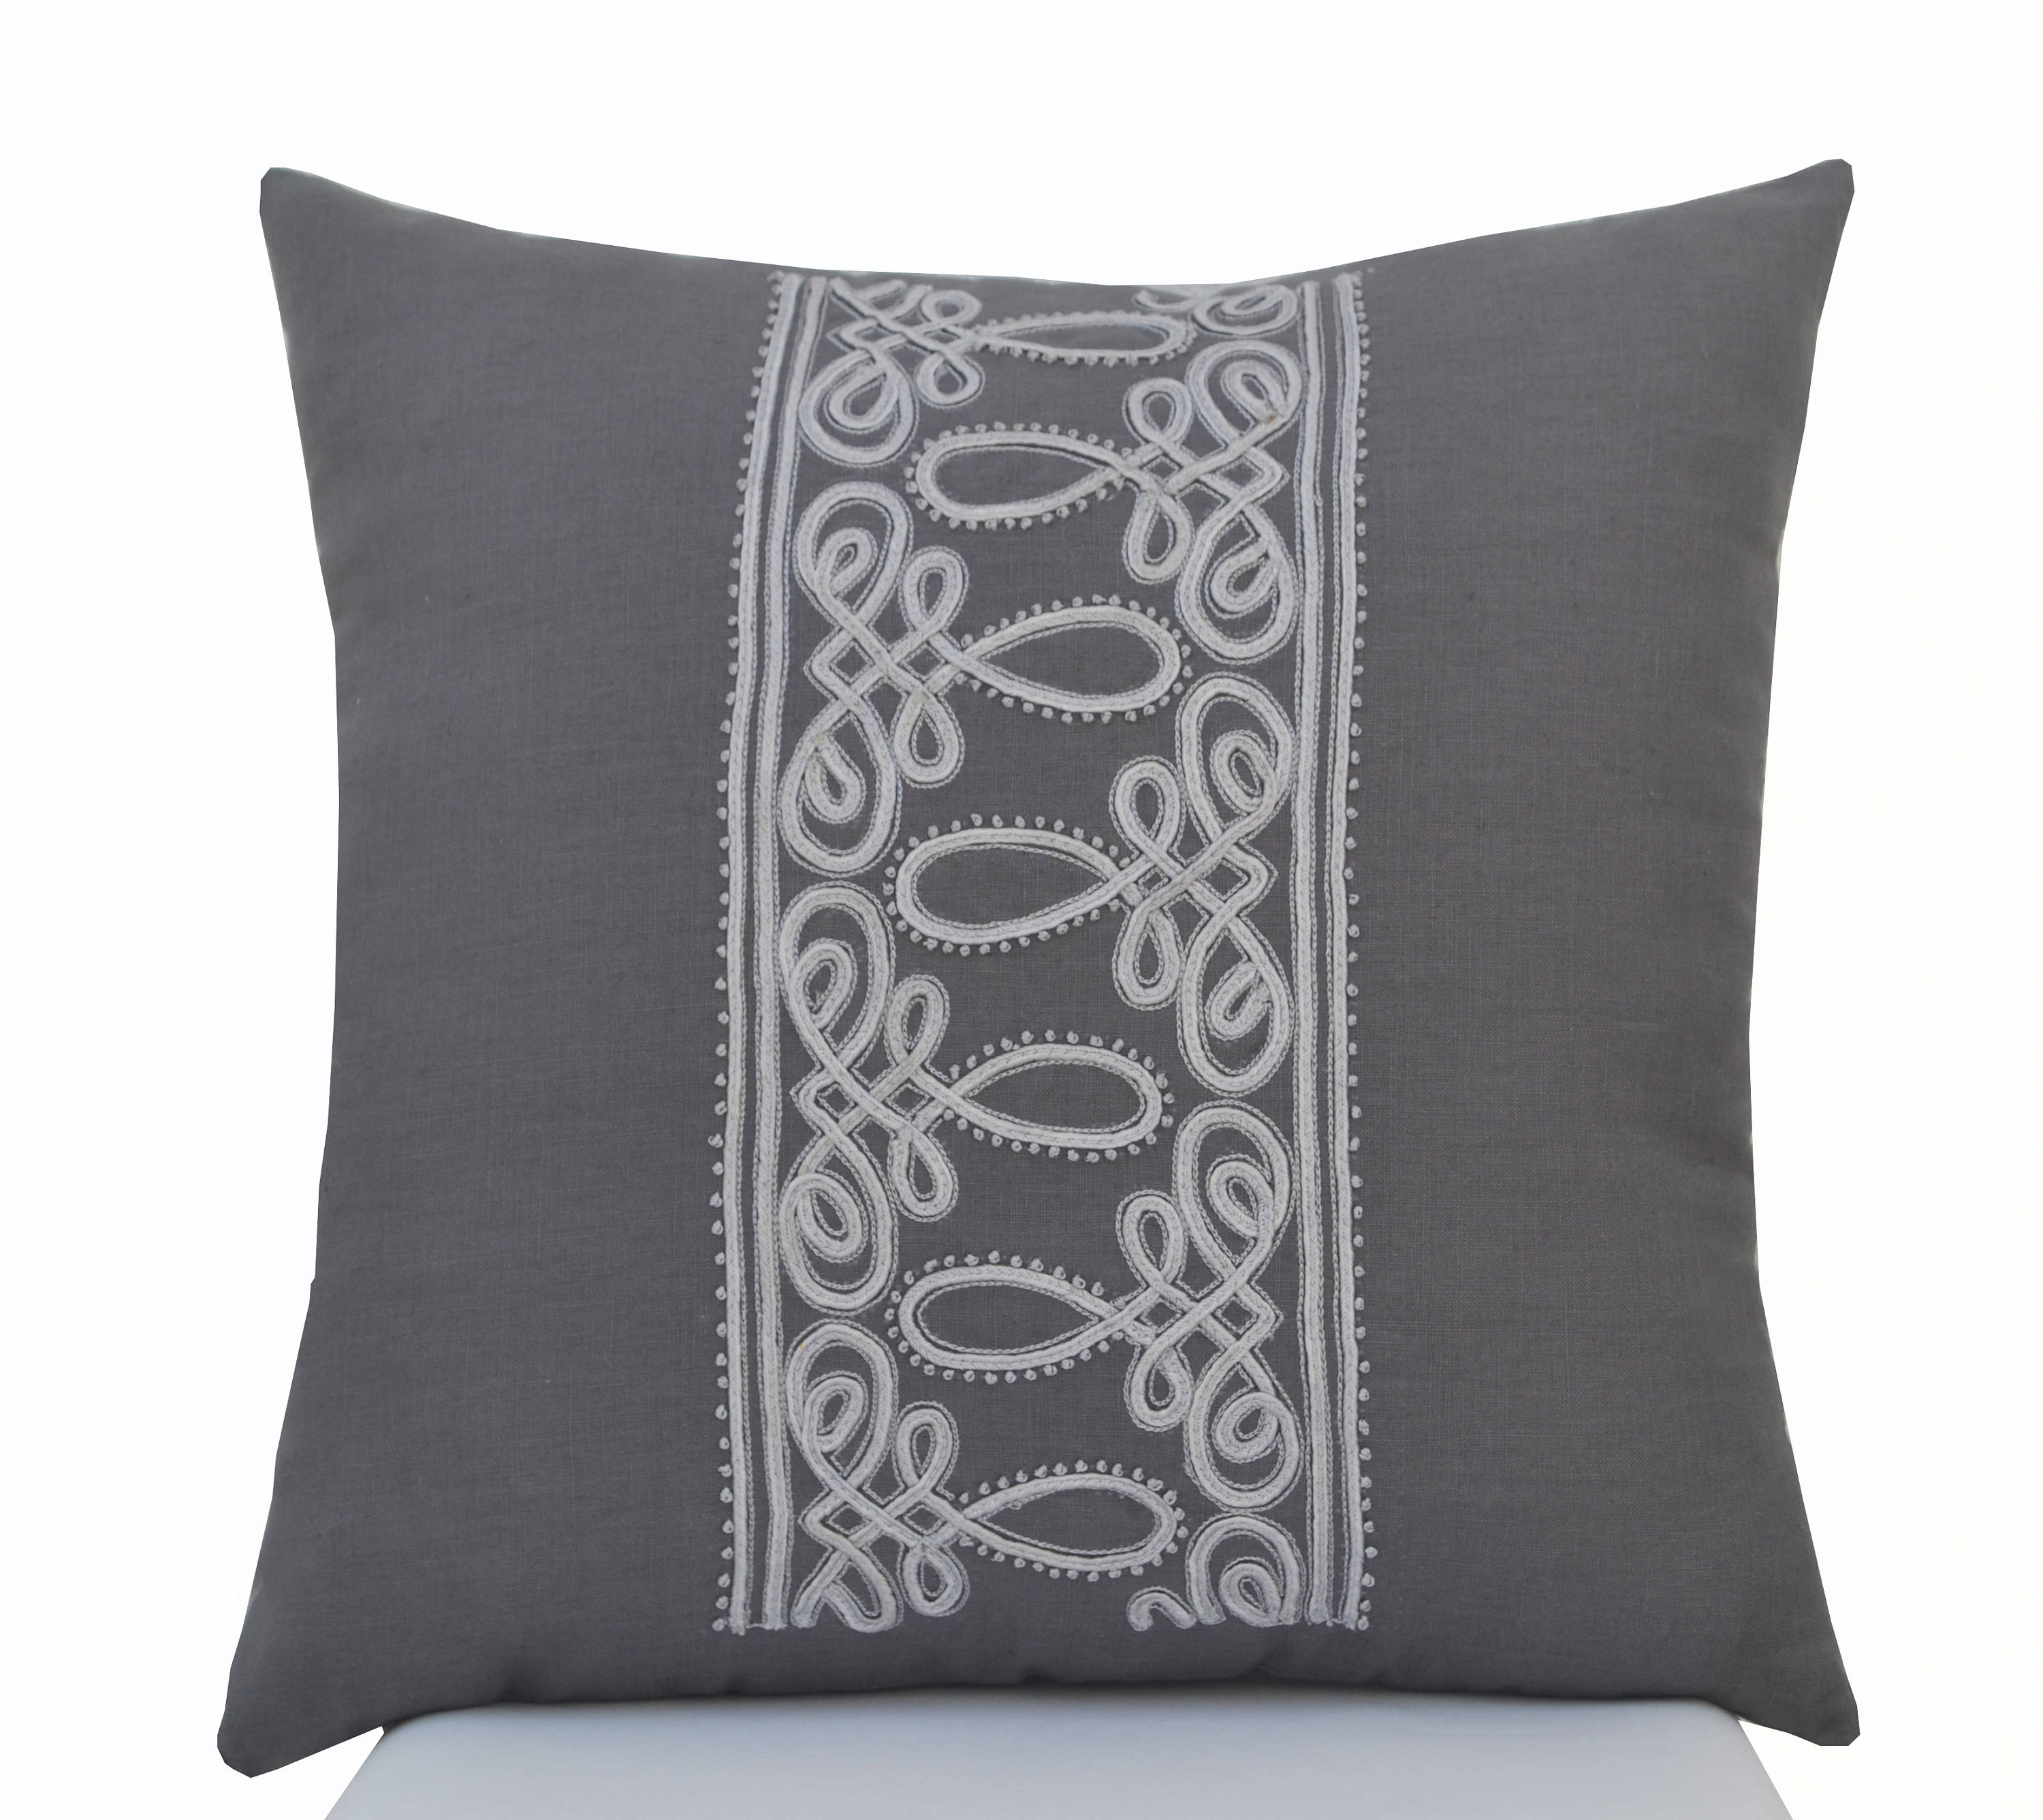 Handcrafted Frech Cord Embroidery Throw Pillow